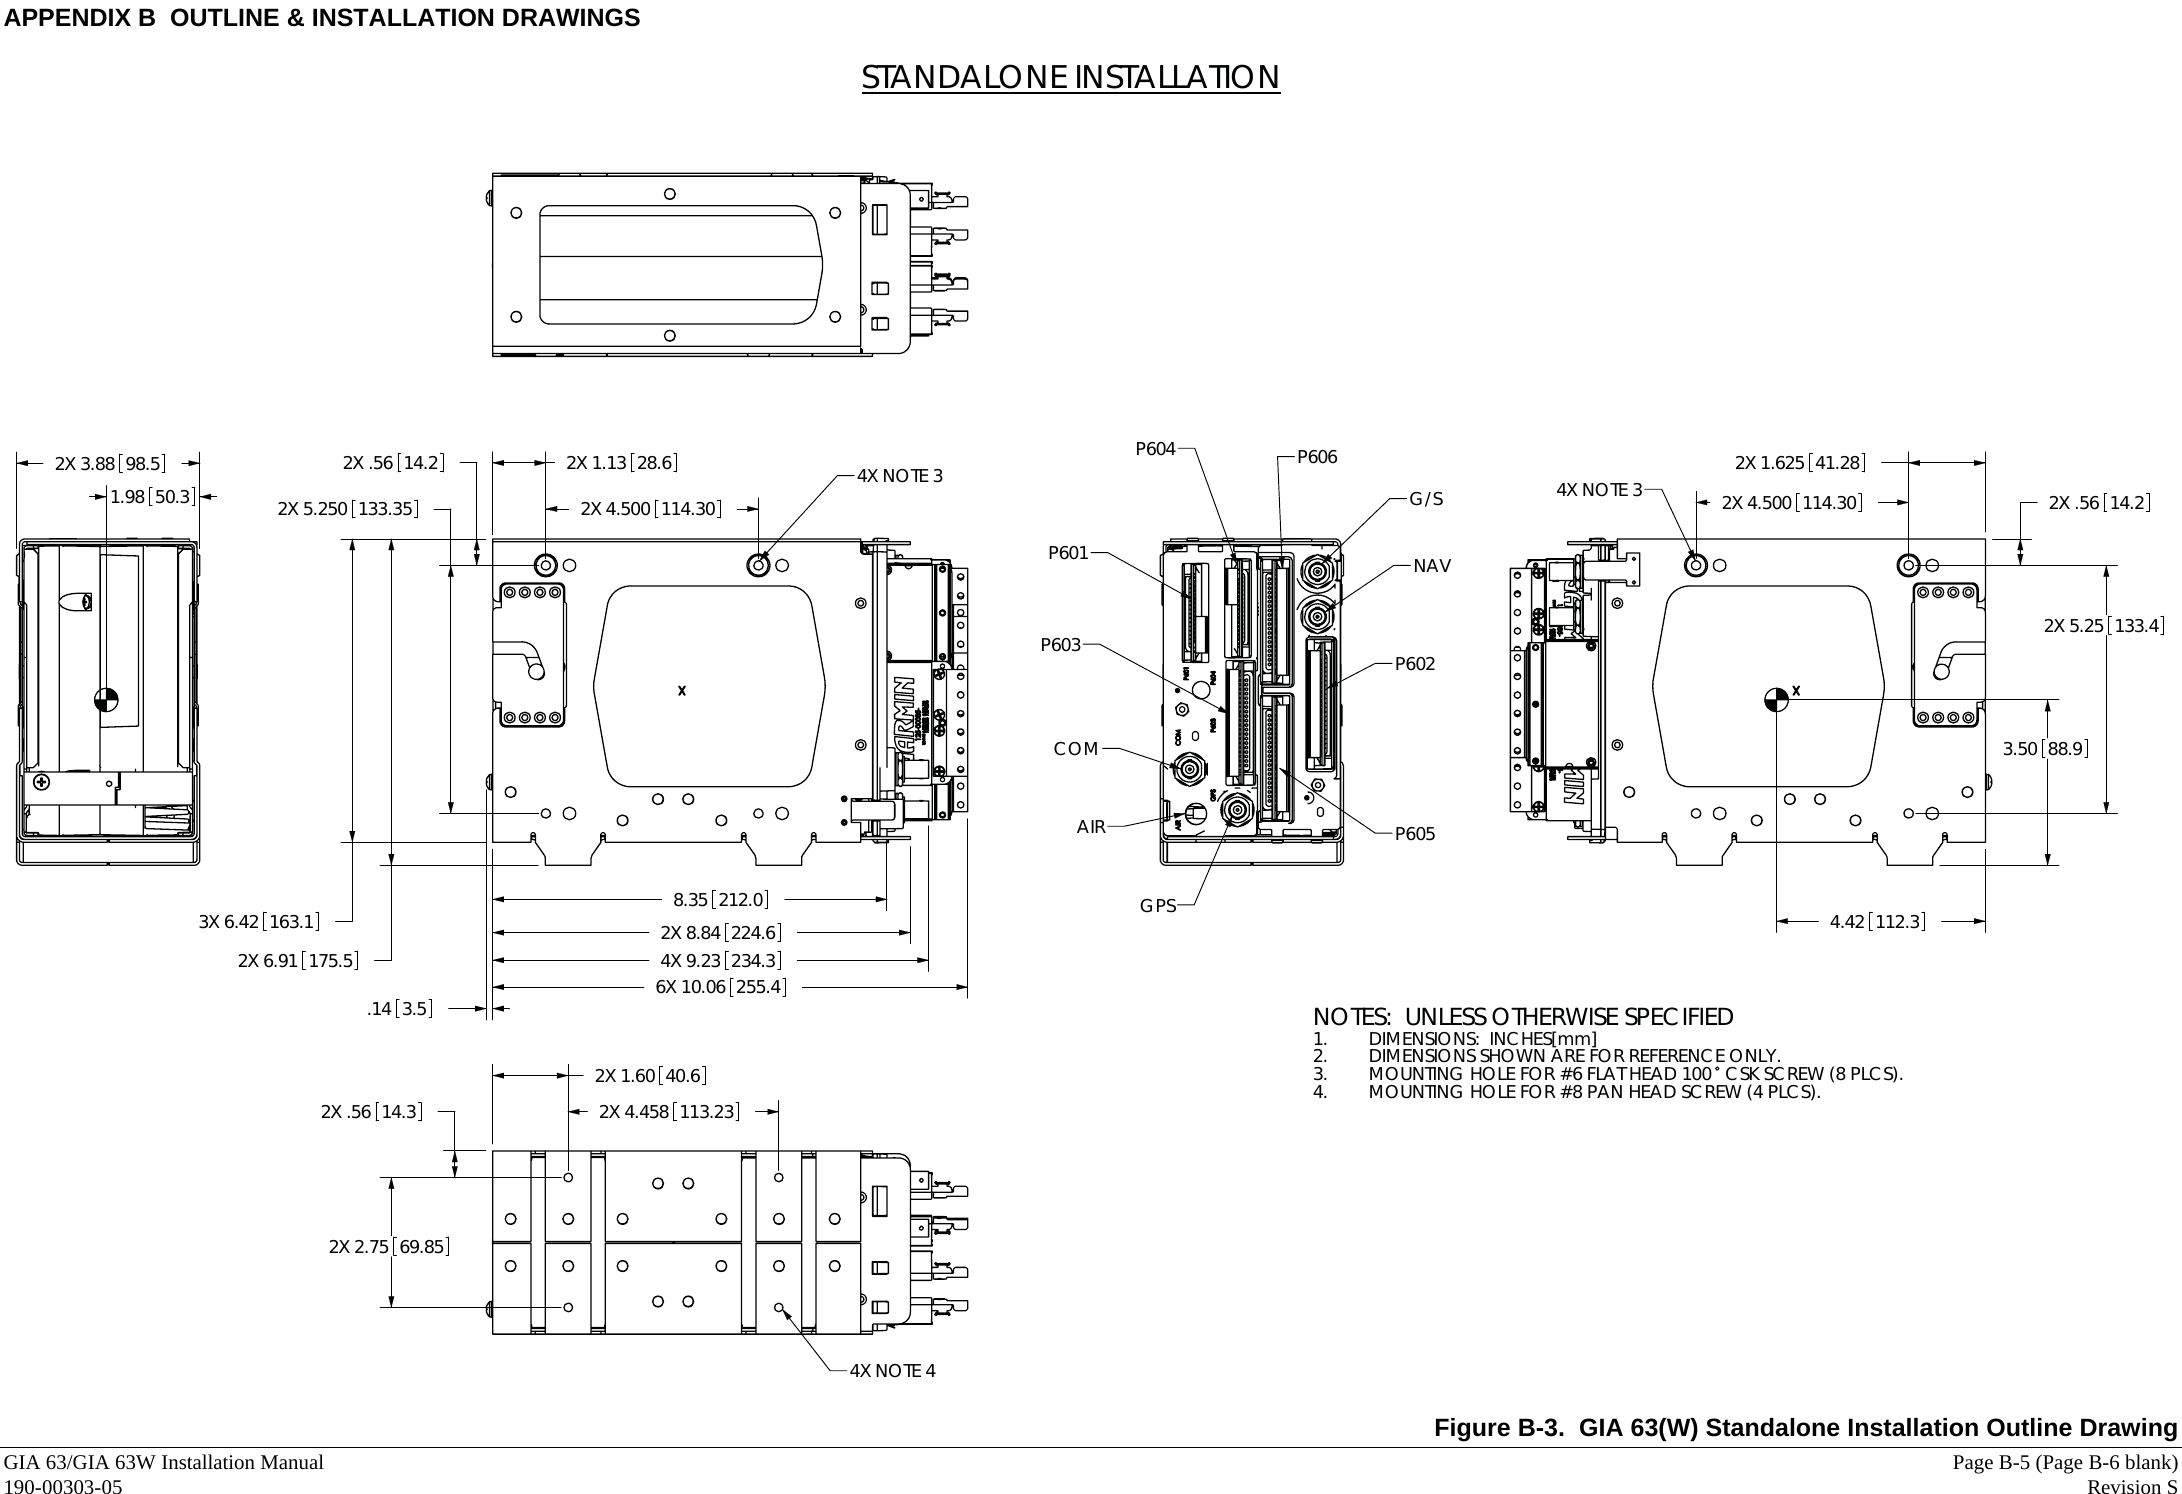 APPENDIX B  OUTLINE &amp; INSTALLATION DRAWINGS GIA 63/GIA 63W Installation Manual     Page B-5 (Page B-6 blank) 190-00303-05   Revision S  3.50 88.94.42 112.31.98 50.3 4X NOTE 3 2X 1.625 41.282X 4.500 114.302X 5.25 133.42X .56 14.2NOTES:  UNLESS OTHERWISE SPECIFIEDDIMENSIONS:  INCHES[mm]1. DIMENSIONS SHOWN ARE FOR REFERENCE ONLY.2. MOUNTING HOLE FOR #6 FLAT HEAD 100  CSK SCREW (8 PLCS).3. MOUNTING HOLE FOR #8 PAN HEAD SCREW (4 PLCS).4.STANDALONE INSTALLATION4X NOTE 42X .56 14.32X 2.75 69.852X 1.60 40.62X 4.458 113.23GPSAIRCOMP603P601P604 P606G/SNAVP602P6054X NOTE 32X 6.91 175.53X 6.42 163.12X 5.250 133.352X .56 14.26X 10.06 255.42X 8.84 224.62X 1.13 28.62X 4.500 114.304X 9.23 234.38.35 212.0.14 3.52X 3.88 98.5  Figure B-3.  GIA 63(W) Standalone Installation Outline Drawing 